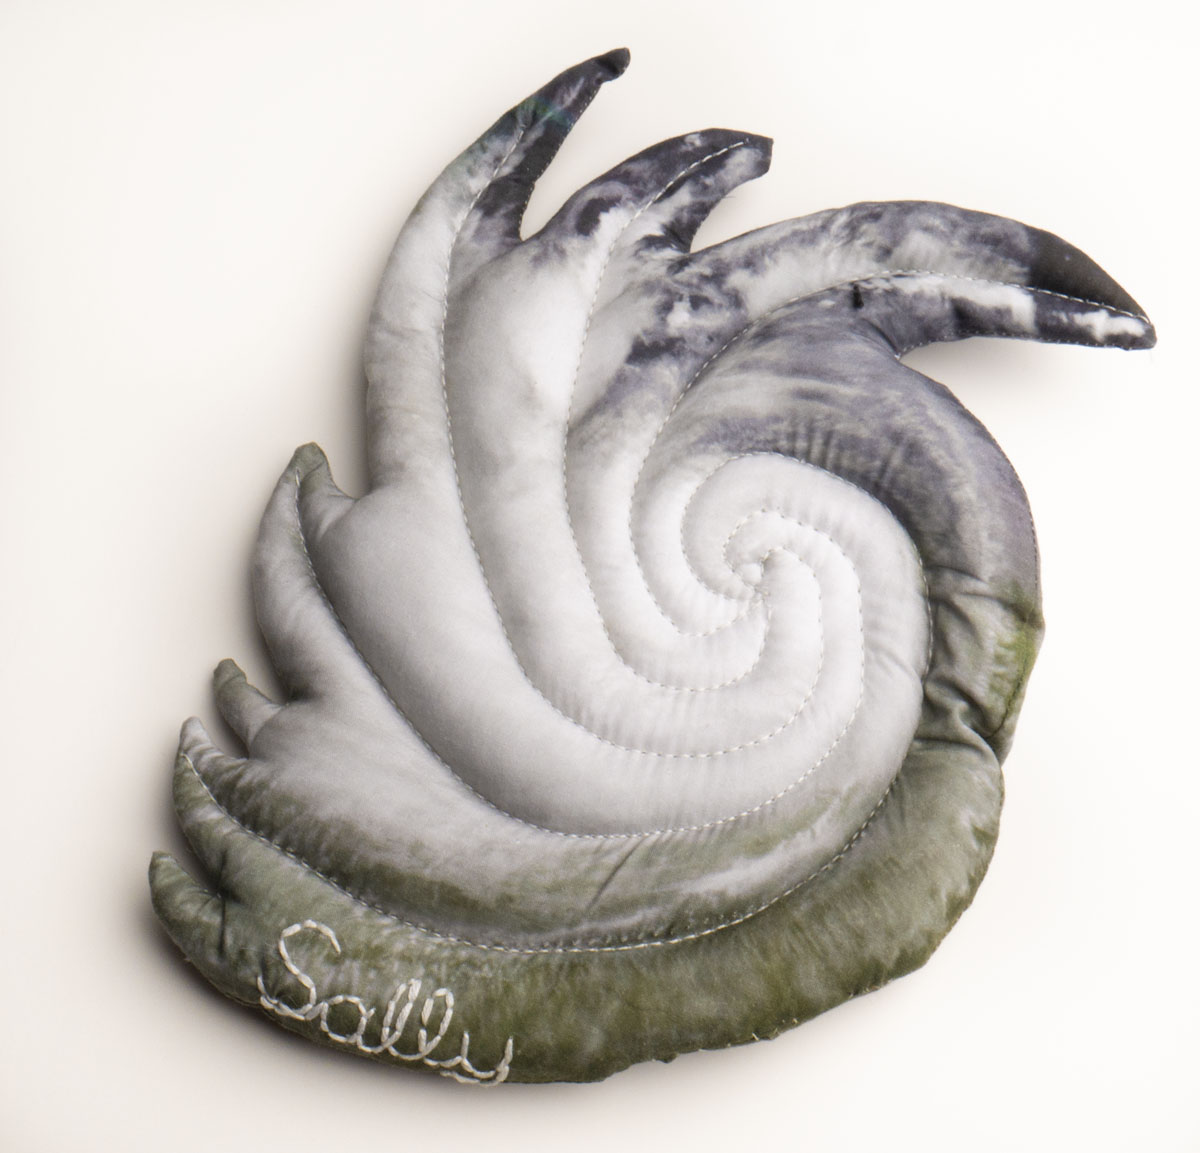 Christine Chin • <em>Stuffed Storms: 2020 Atlantic Tropical Storm Season (Sally)</em> • Stuffed and quilted archival ink prints on fabric • $95.00